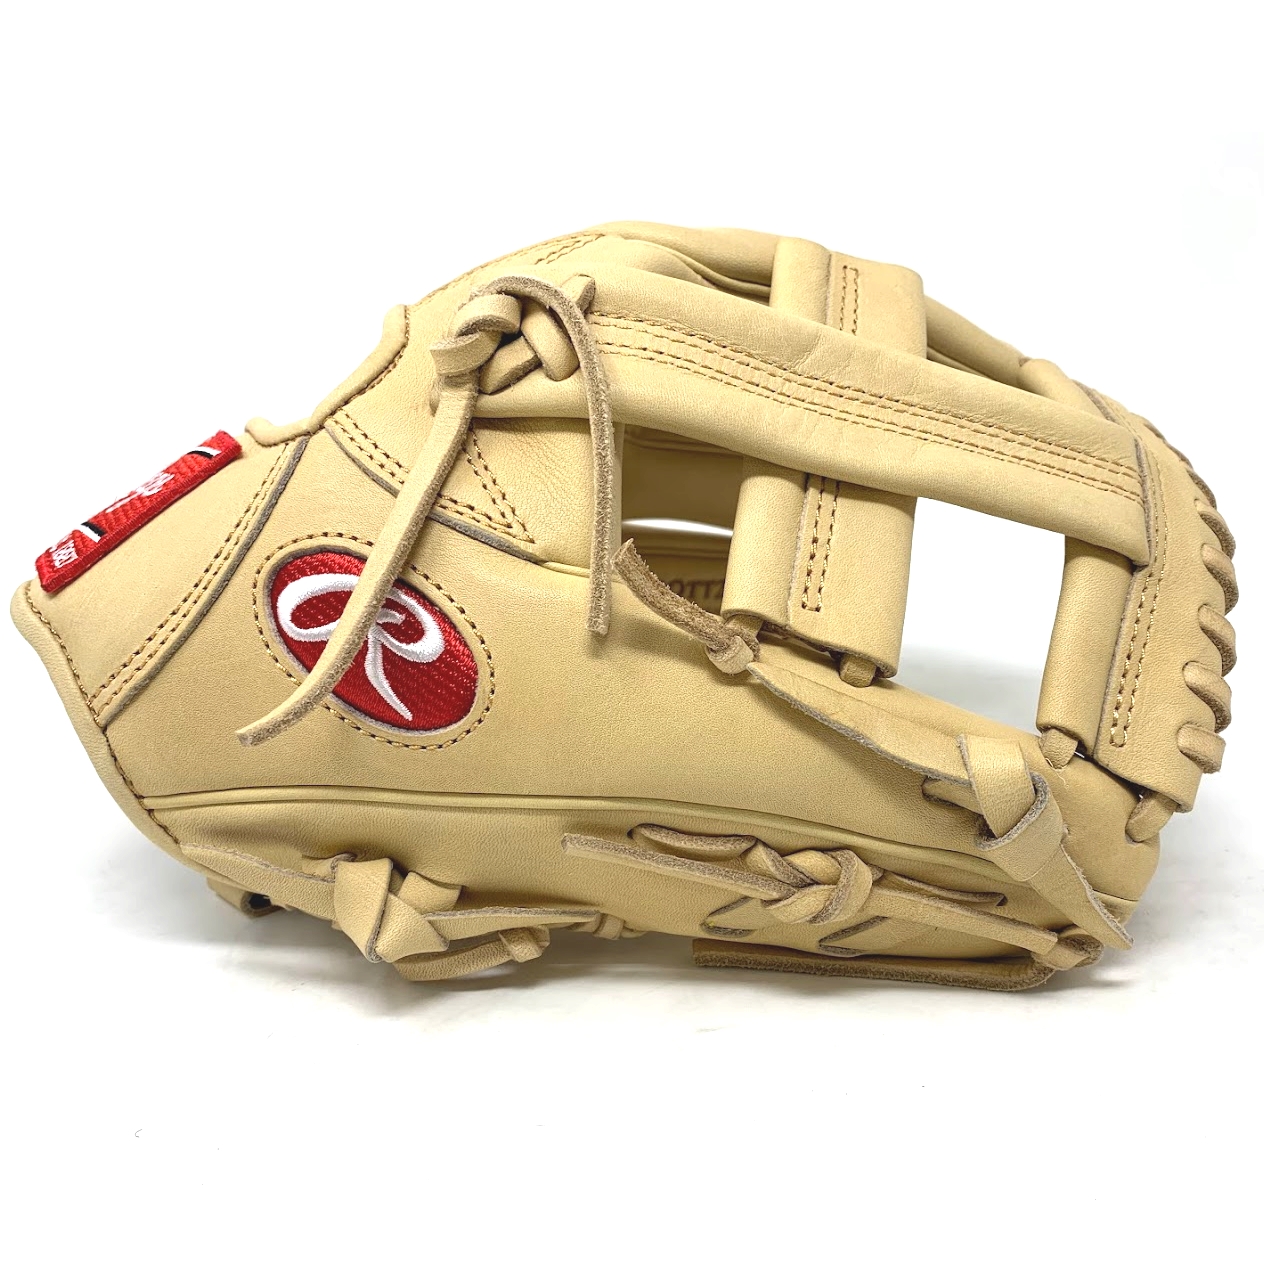 rawlings-heart-of-the-hide-pro-tt2-baseball-glove-11-5-camel-camel-laces-right-hand-throw PROTT2-CC-RightHandThrow Rawlings  Take the field with this limited production Rawlings Heart of the